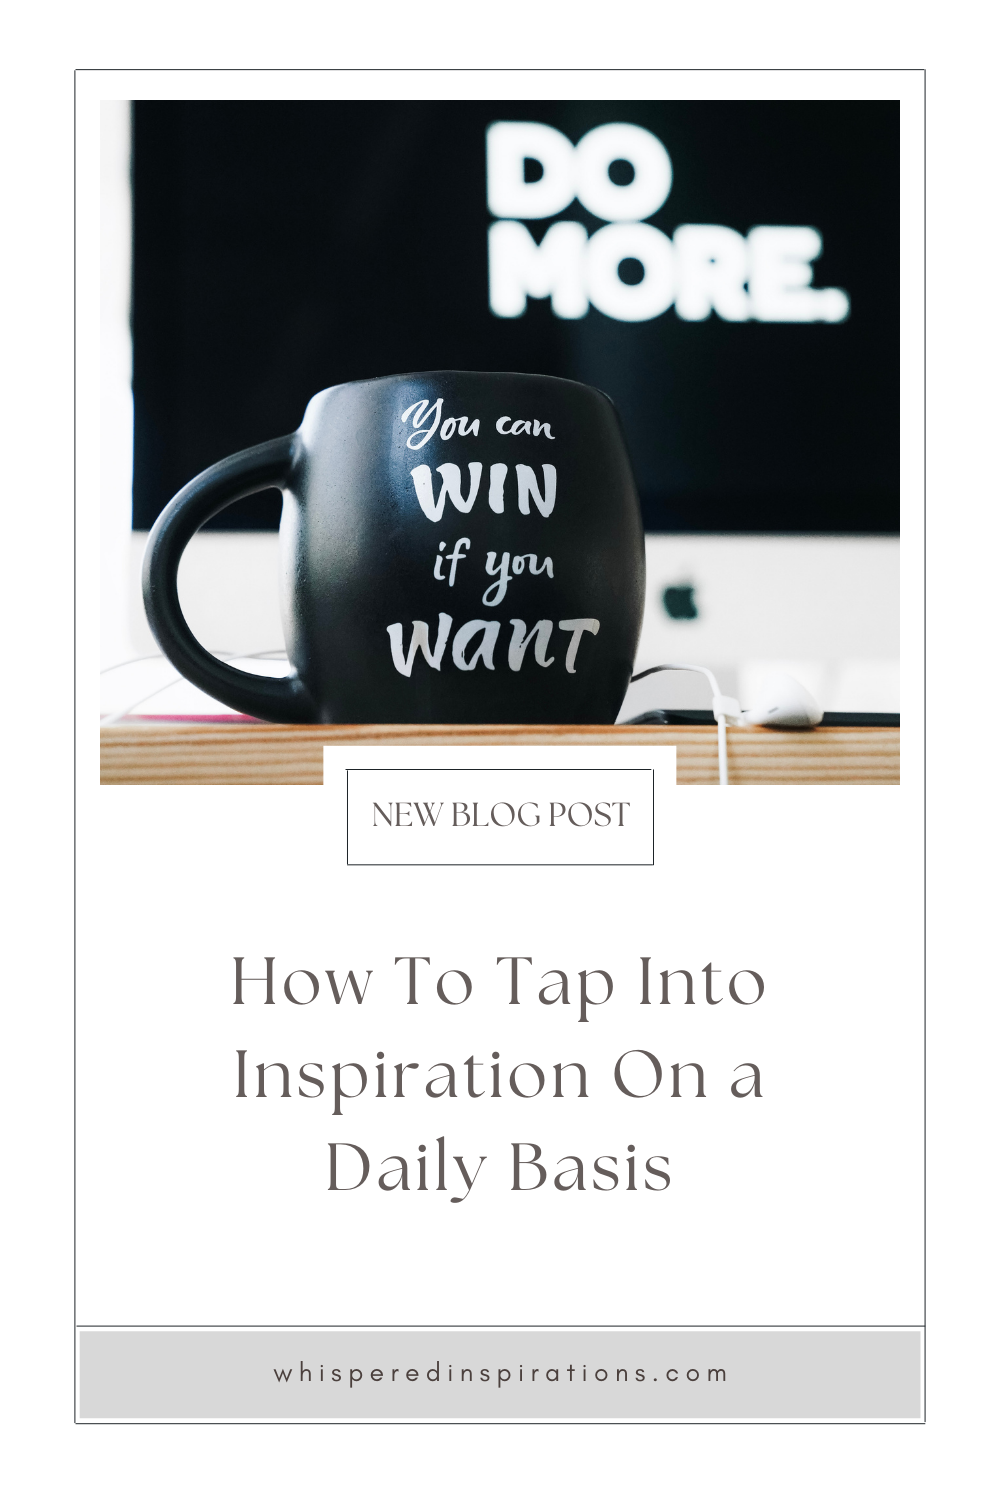 A computer screen says, "Do More." A mug on the desk reads, "You can win, if you want." This article covers ways for tapping into inspiration on a daily basis.